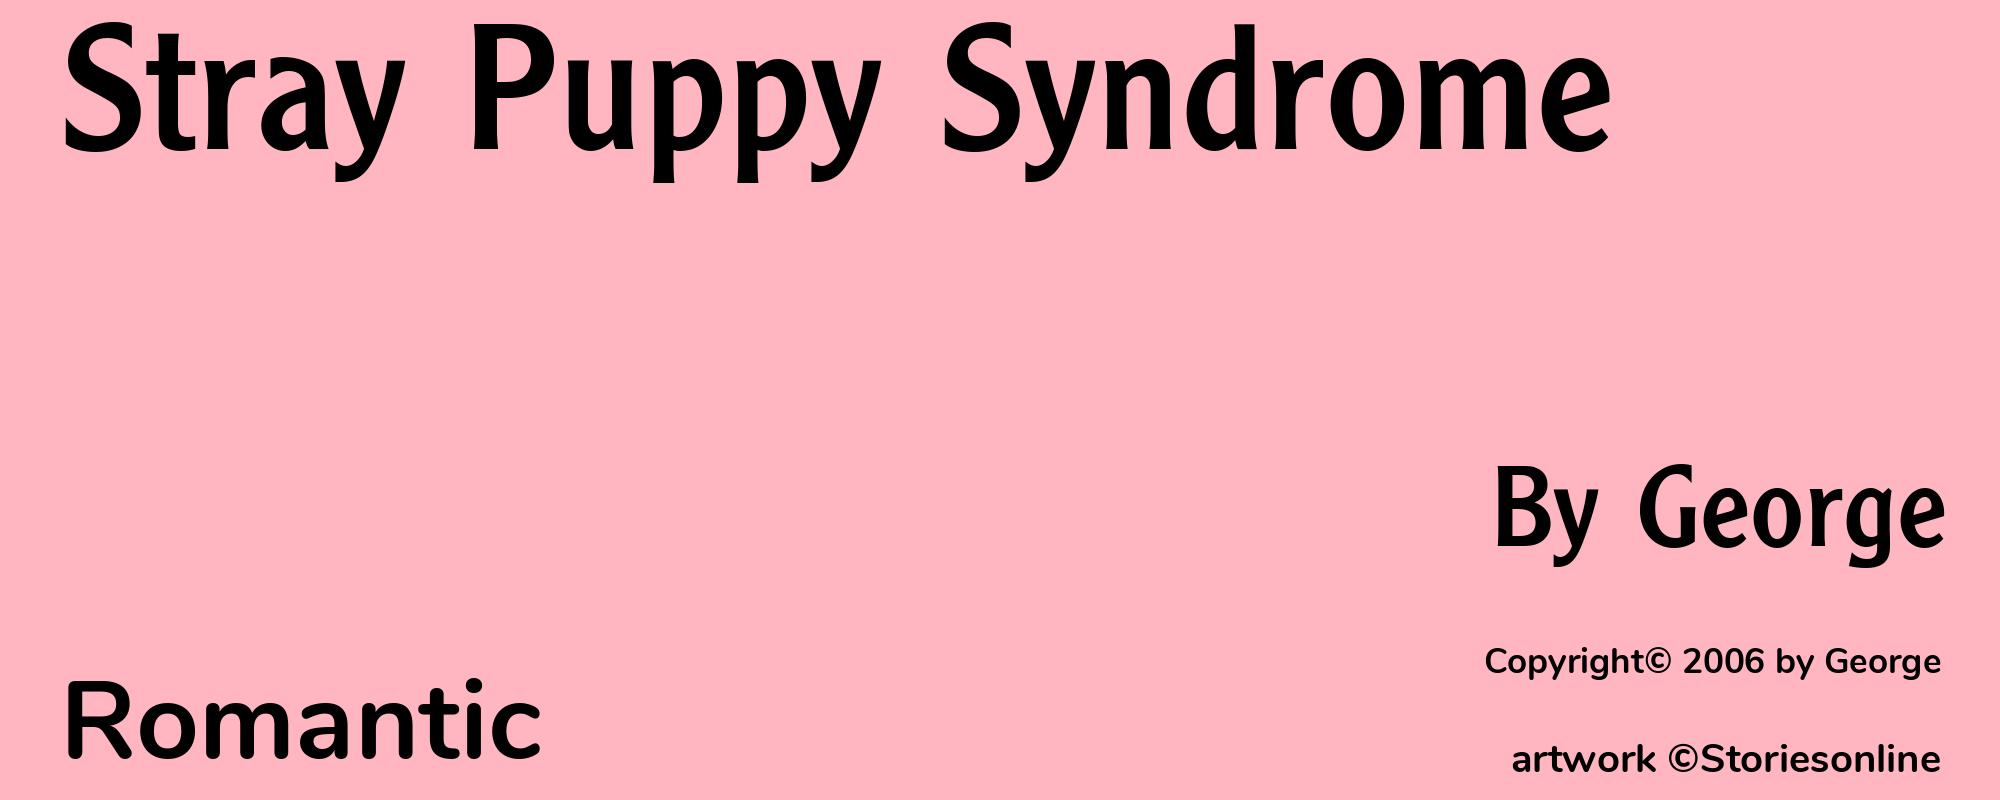 Stray Puppy Syndrome - Cover